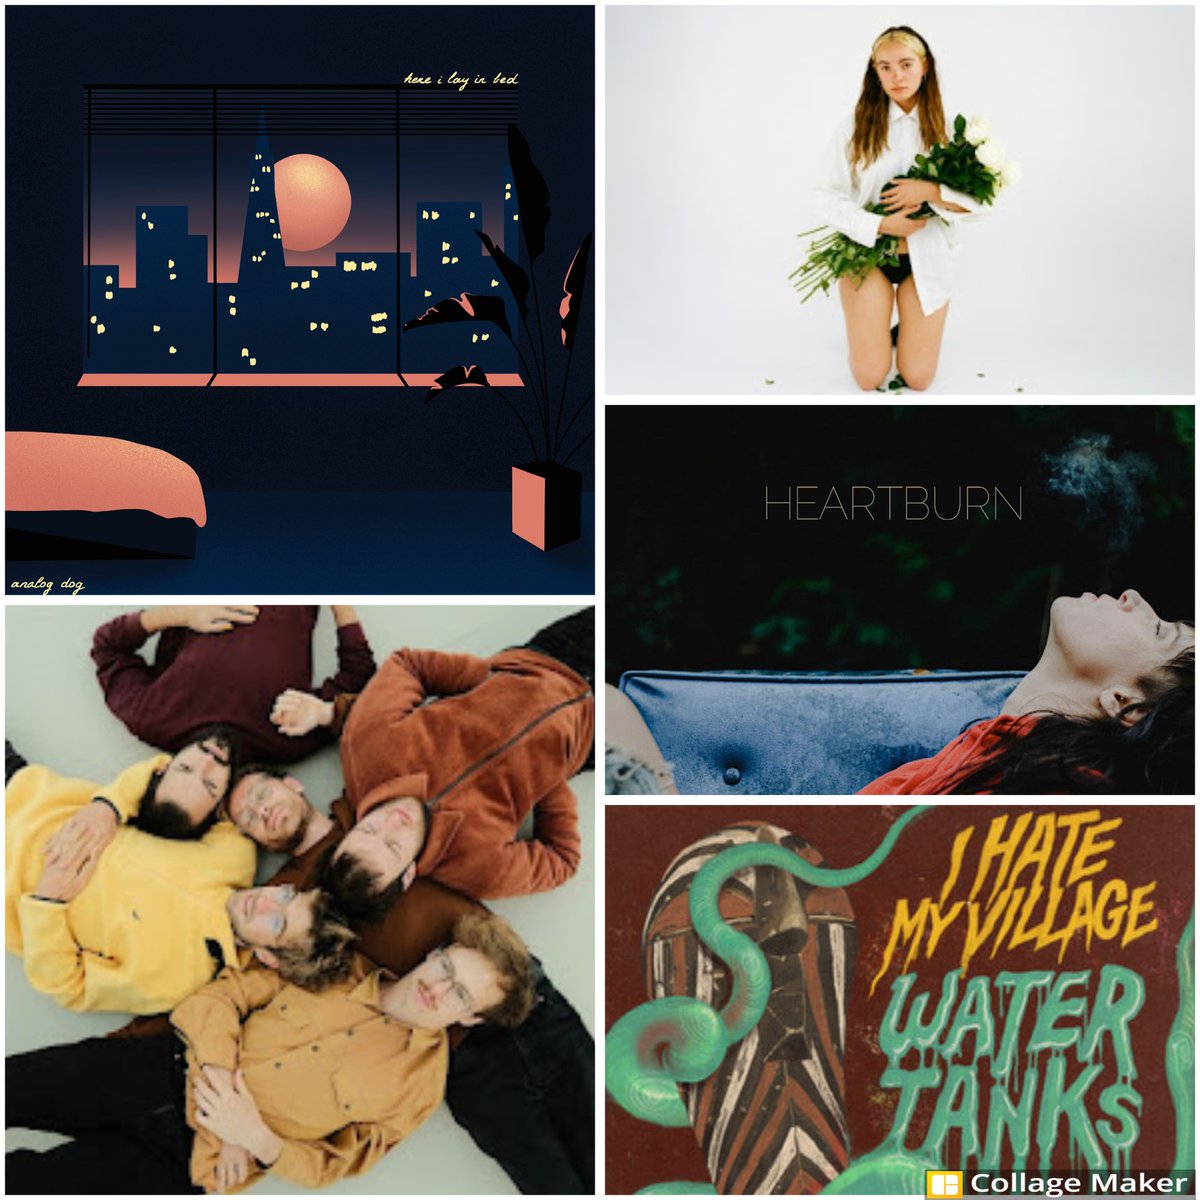 New Posts Alert 🚨 Check out the latest releases from Analog Dog (#analogdog), néomí (@neomistweet), Neavv (@IamNEAVV), Almost Twins (#almosttwins) and I Hate My Village (#ihatemyvillage) by tapping the link in our bio!